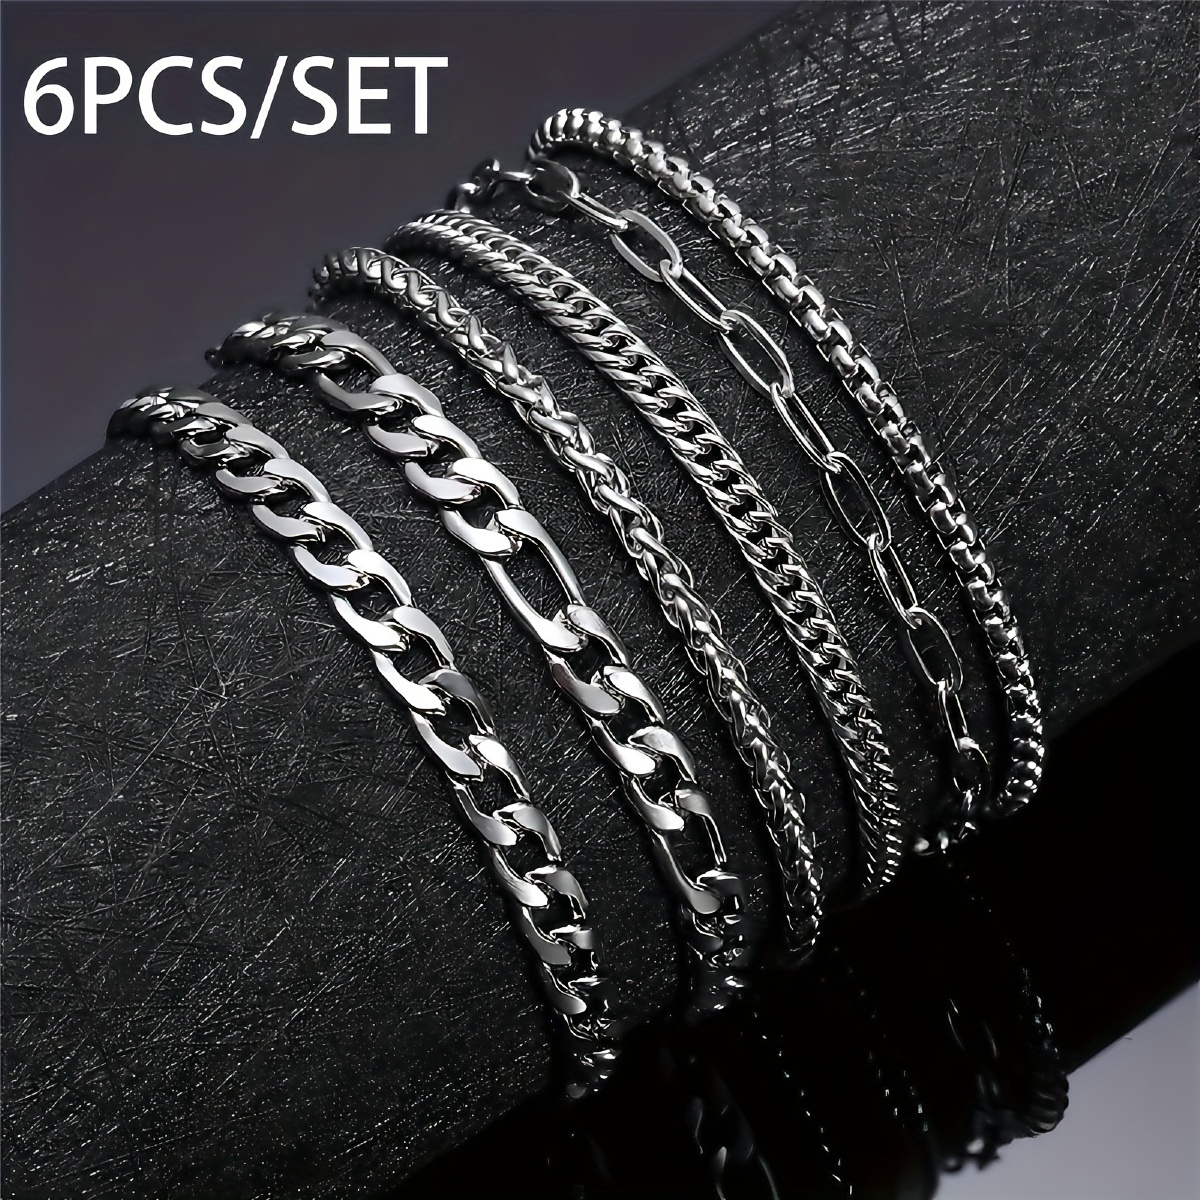 

6pcs Stainless Steel Chain Bracelets For Men Women 2mm Cuban Snake Twists Rope Box Beads Paperclip Link Chain Bracelet Sets Jewelry Gifts 7 Inches Length Adjustable